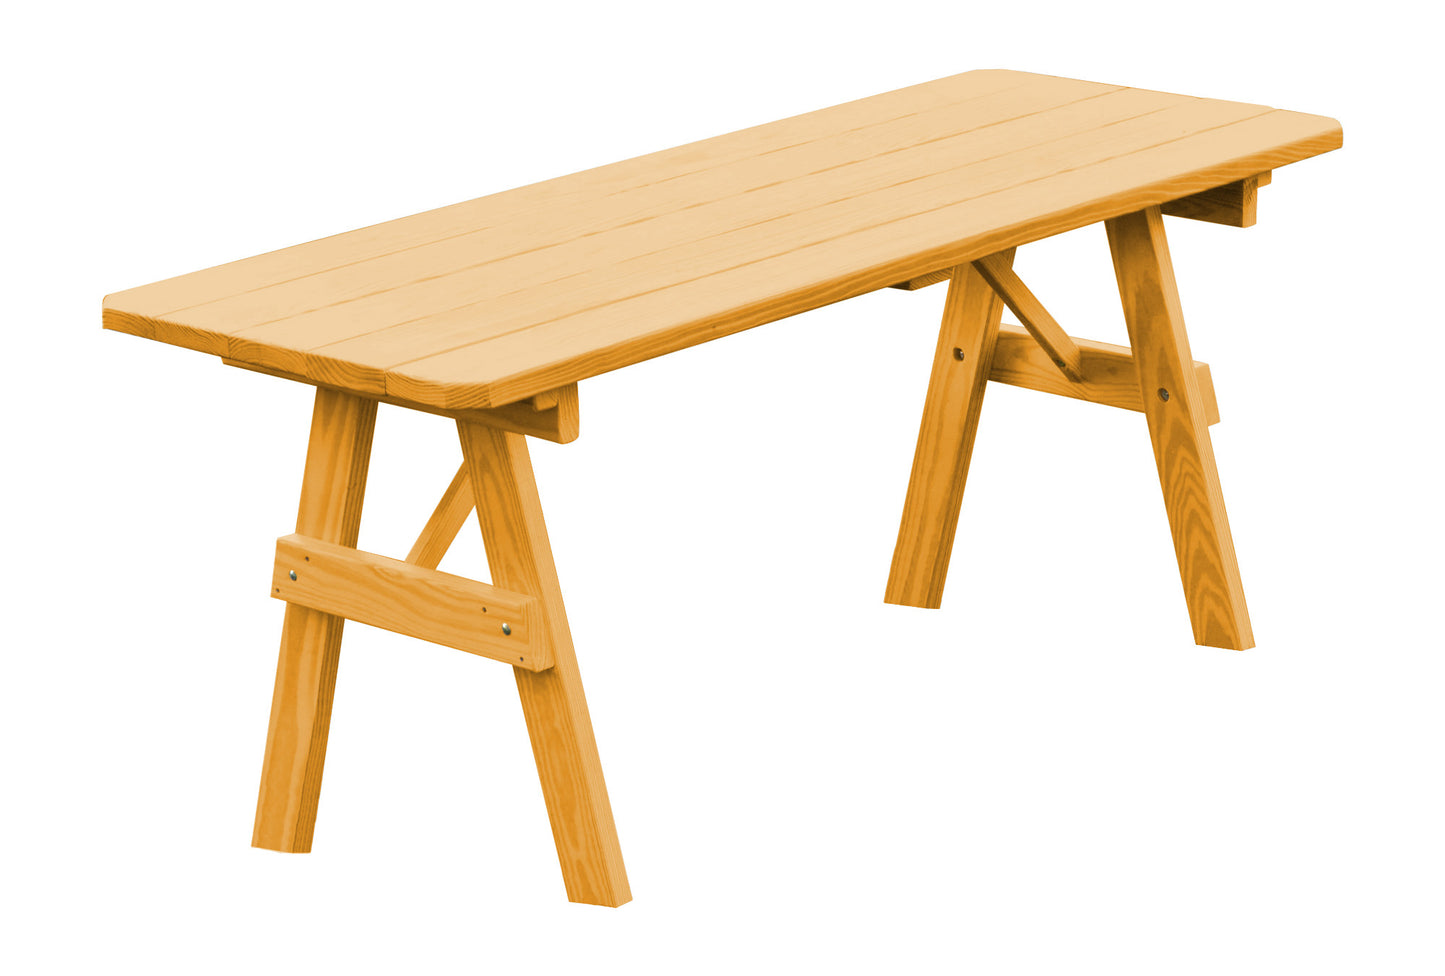 A&L Furniture Co. Yellow Pine 8' Traditional Table Only - Umbrella Hole - LEAD TIME TO SHIP 10 BUSINESS DAYS